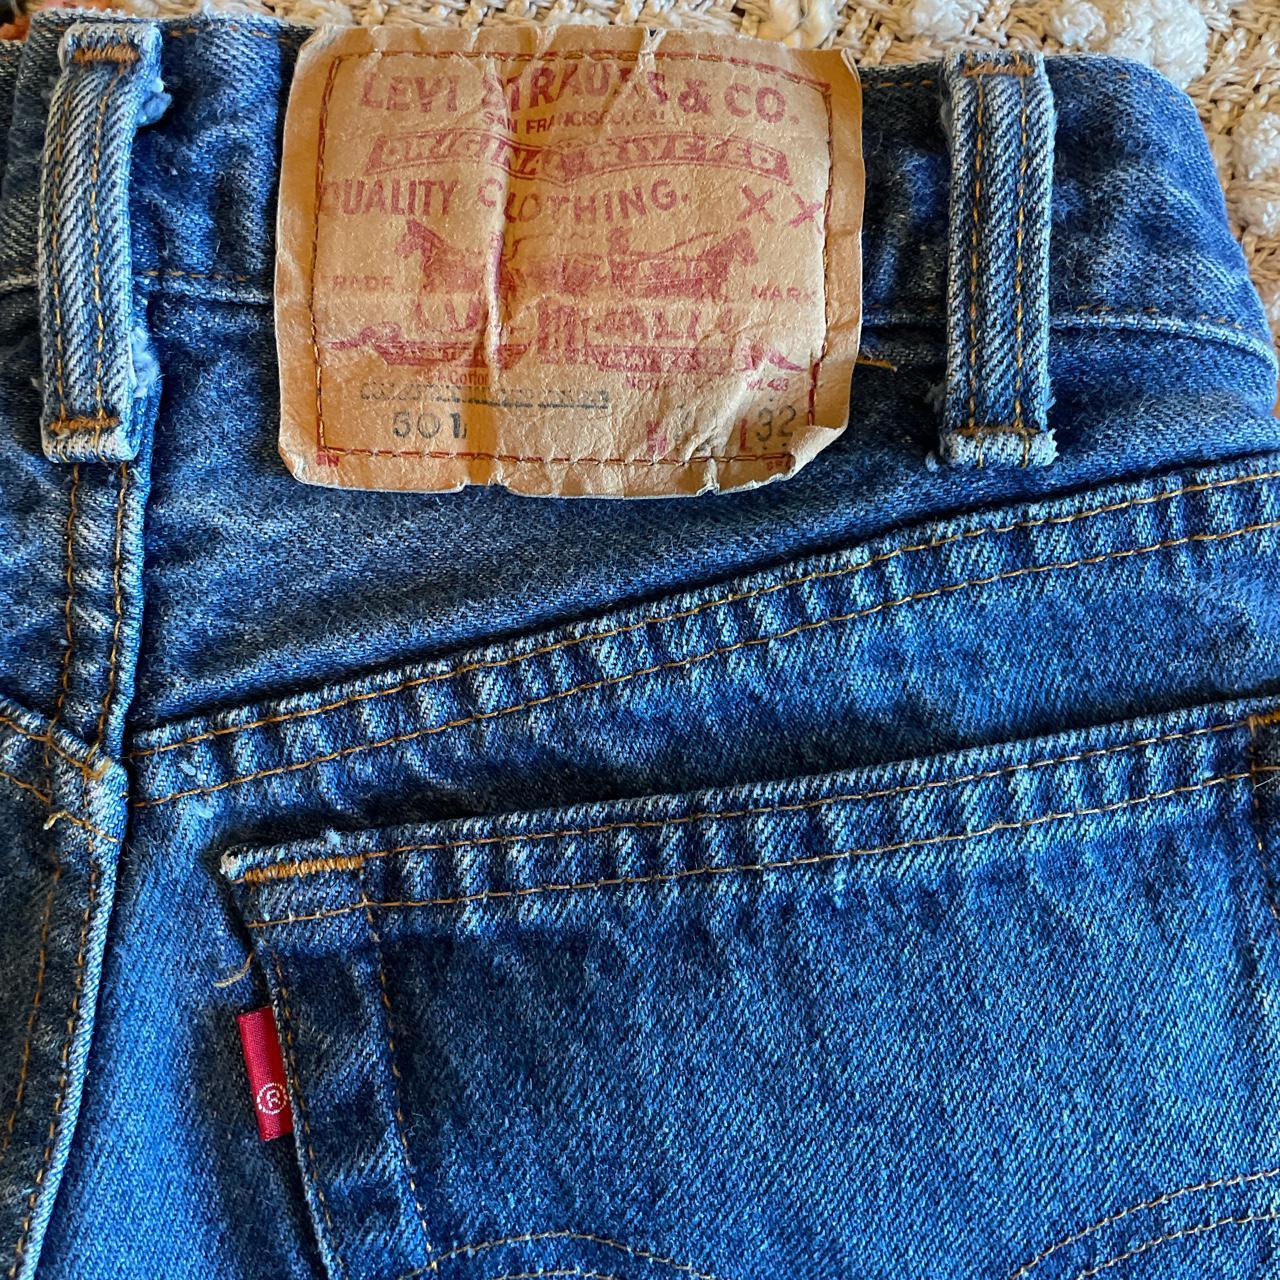 Product Image 4 - VINTAGE 1980s LEVI 501s 👖

HIGH